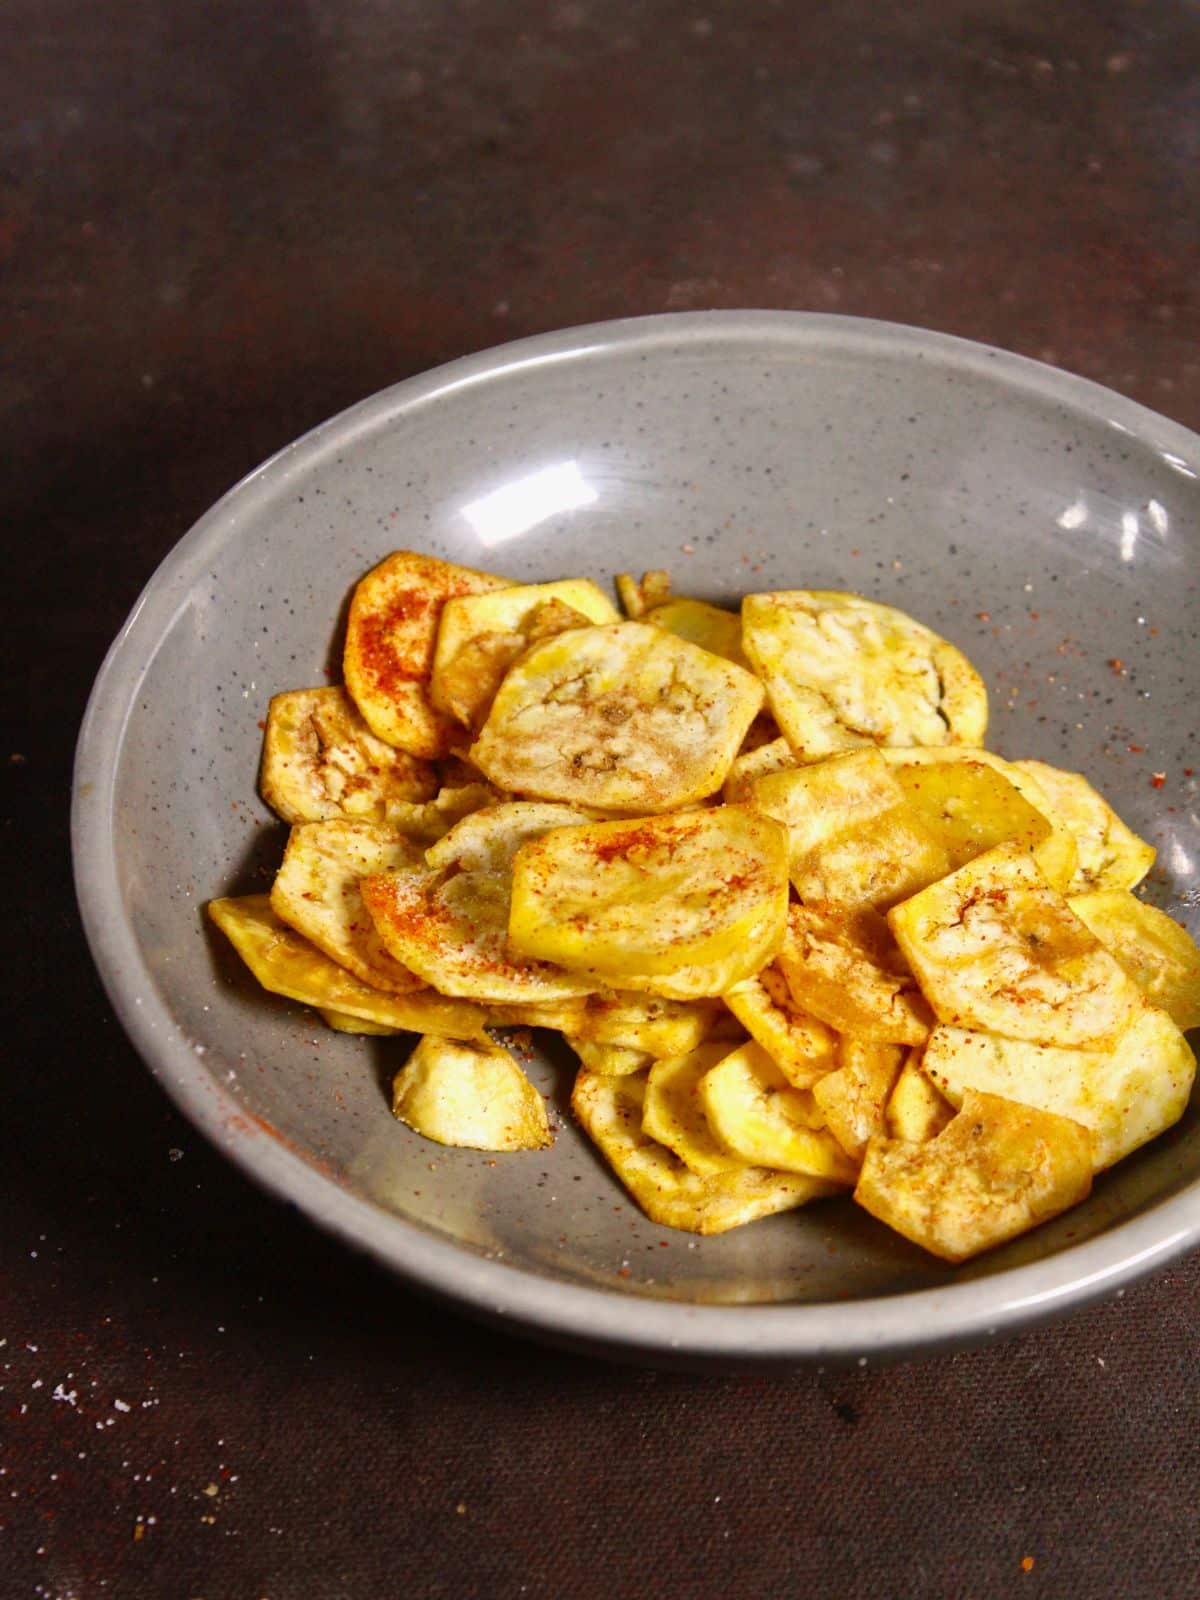 enjoy yummy red hot banana chips with tea